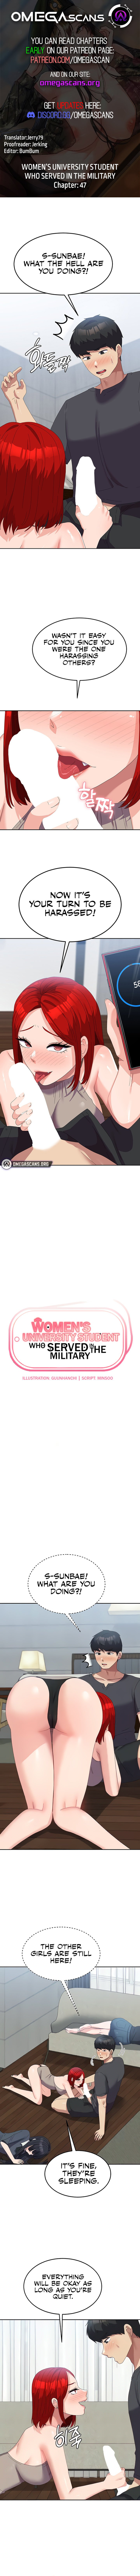 womens-university-student-who-served-in-the-military-chap-47-0